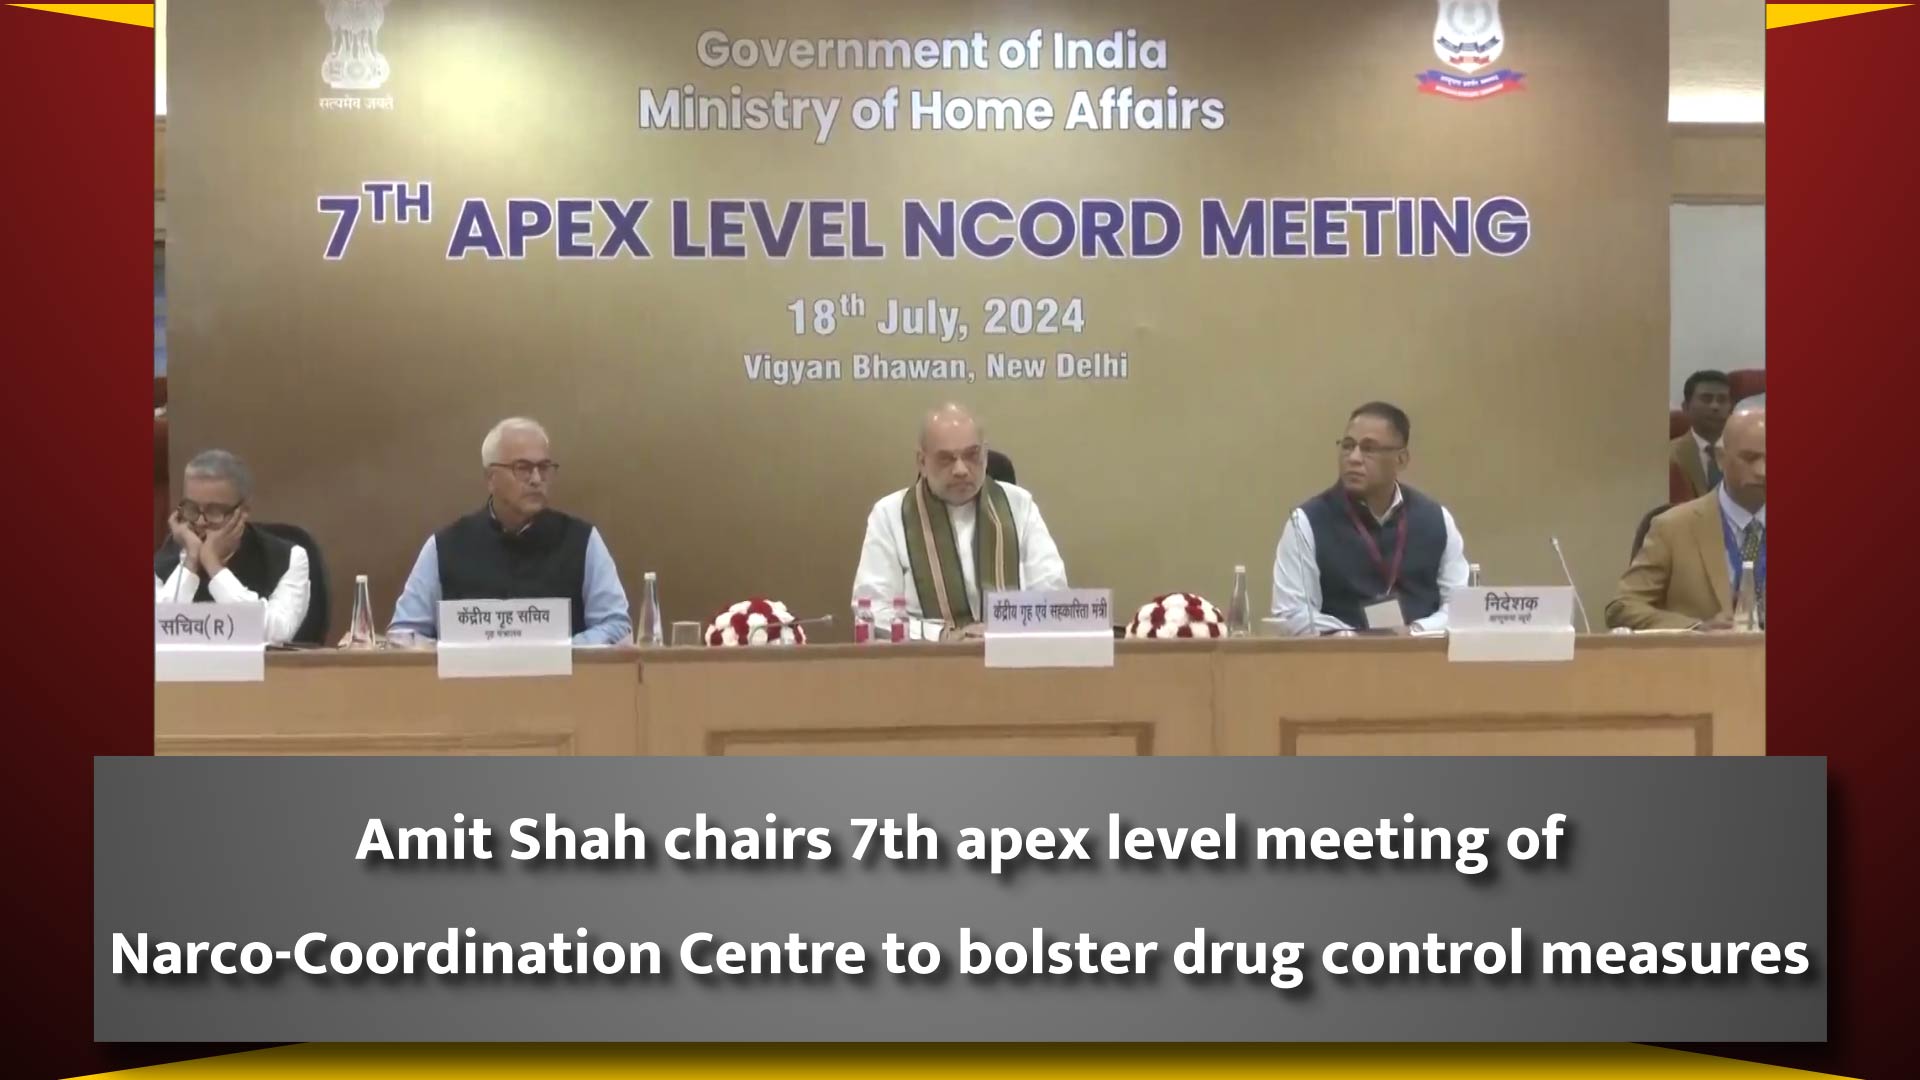 Amit Shah chairs 7th apex level meeting of Narco-Coordination Centre to bolster drug control measures